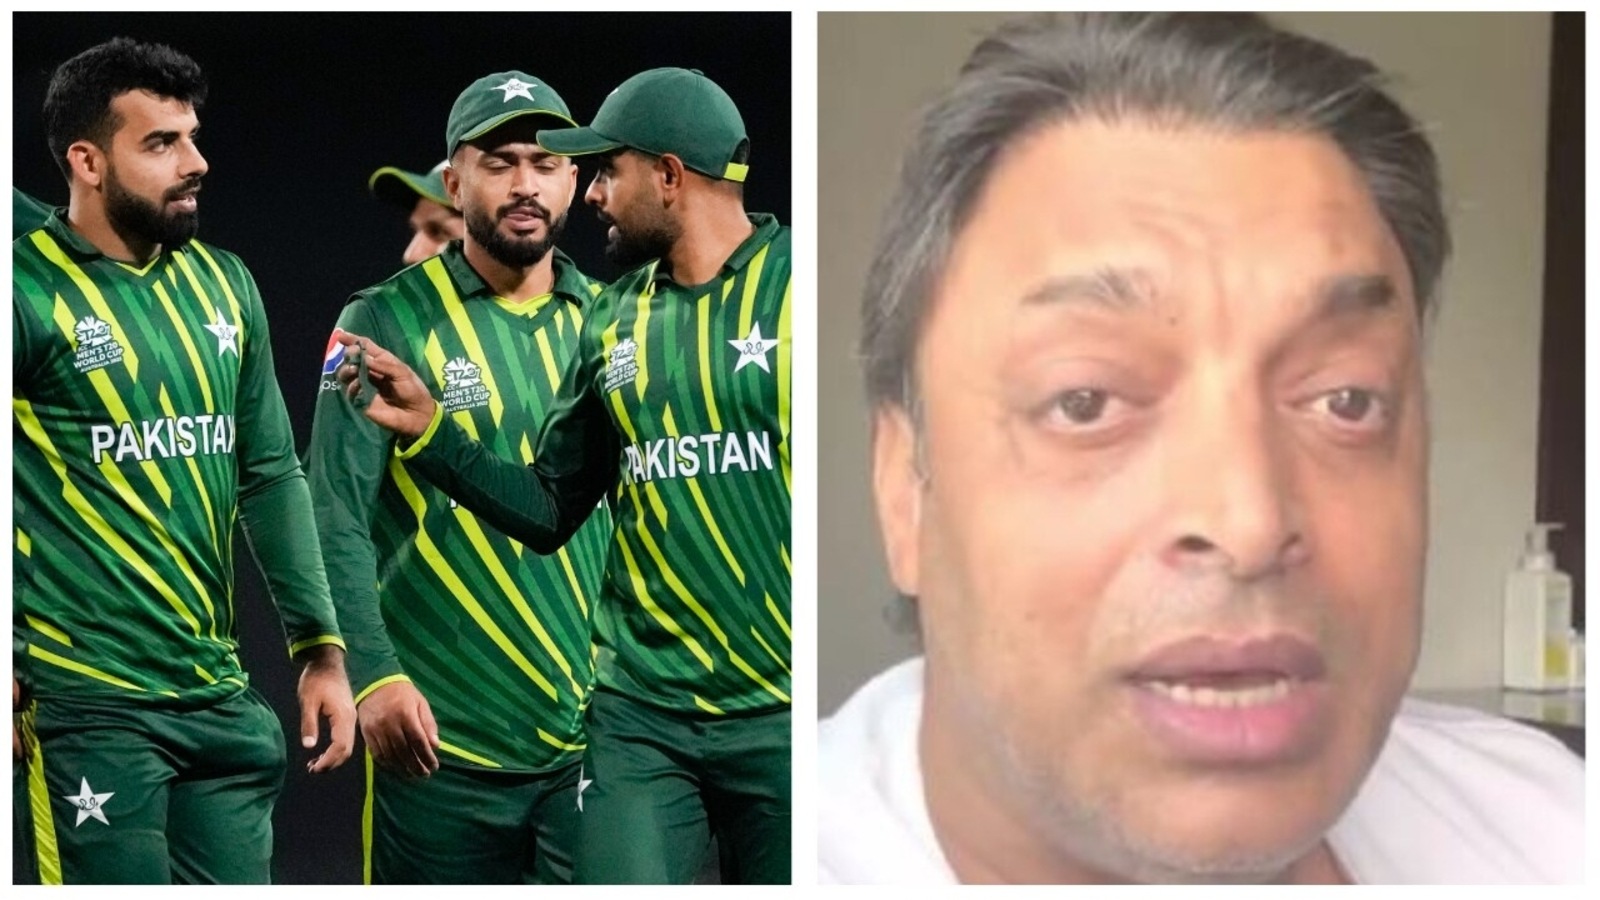 you-never-know-which-pakistan-shoaib-akhtar-makes-cheeky-remark-amid-rain-marred-pak-vs-sa-tie-at-t20-wc-watch